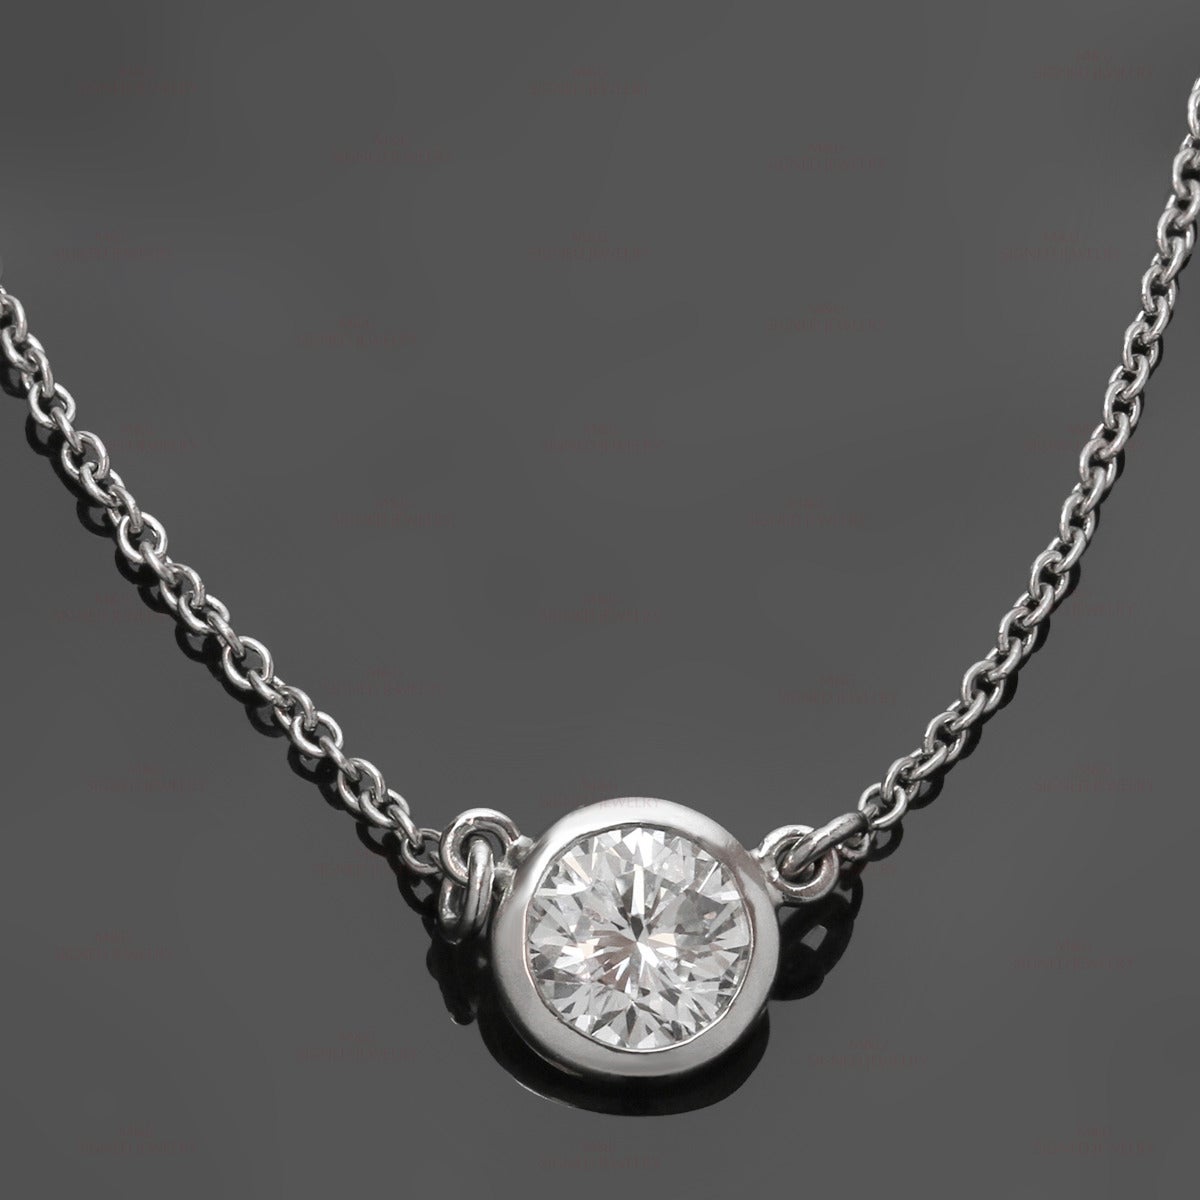 This fine platinum Tiffany & Co. necklace was designed by Elsa Peretti and features a small round pendant bezel-set with a brilliant-cut E-F VVS2-VS1 diamond of an estimated 0.60 carats. Made in United States circa 2000s. Measurements: 0.23